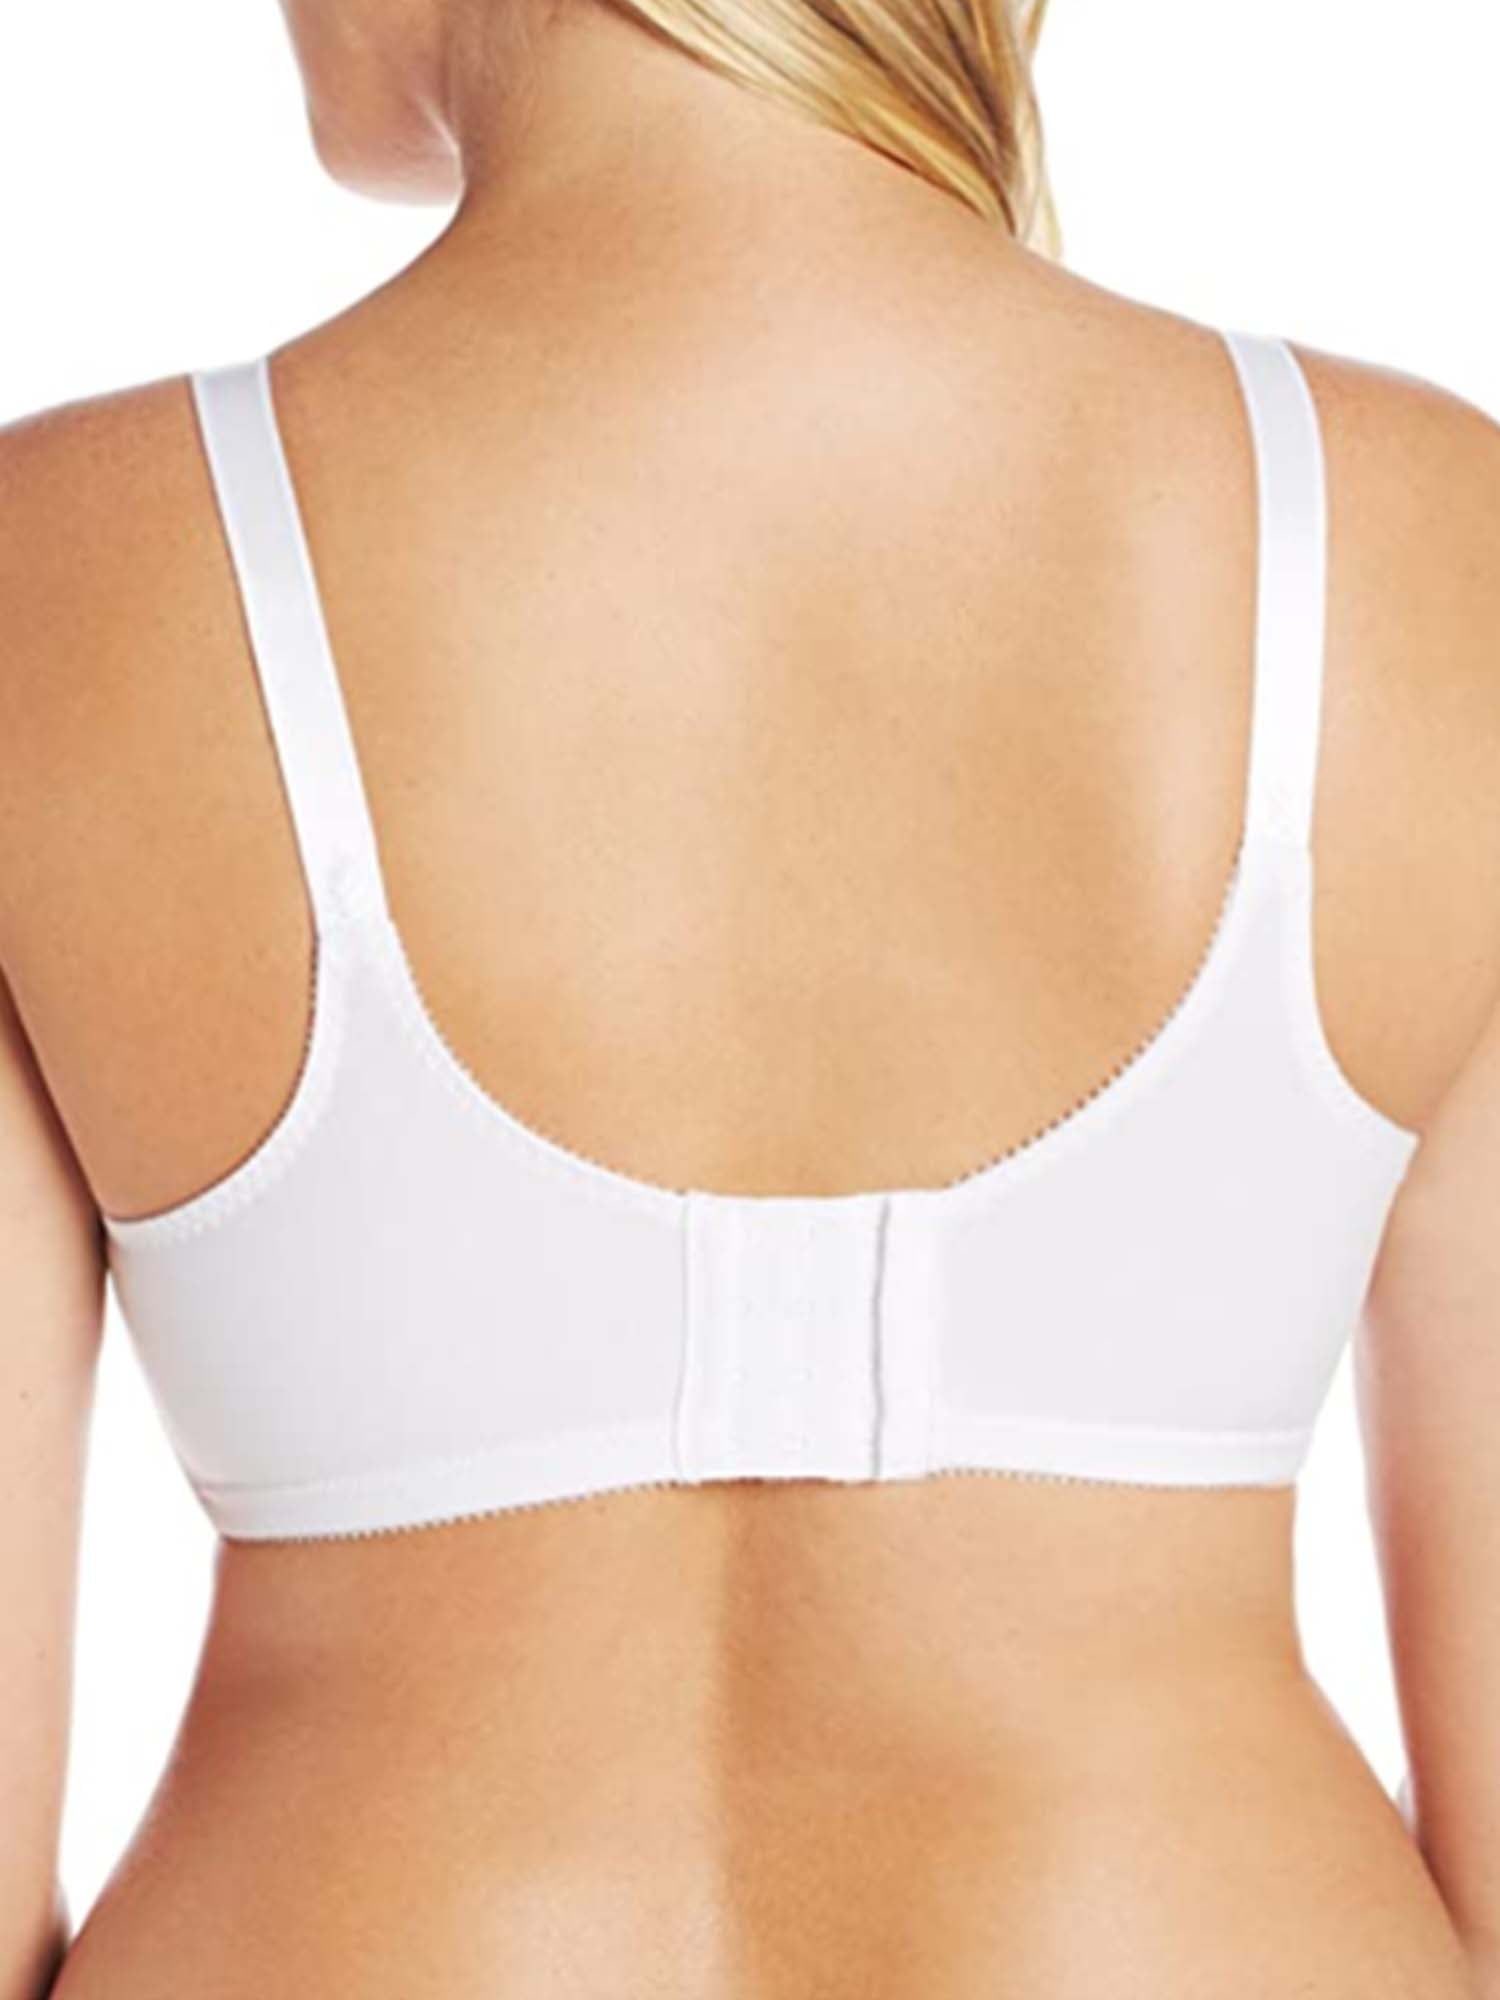 Rbaofujie Womens Double Support Wireless Bra, Full-Coverage Wirefree  T-Shirt Bra, Comfortable Cotton Wirefree Bra, Our Best Everyday Bra